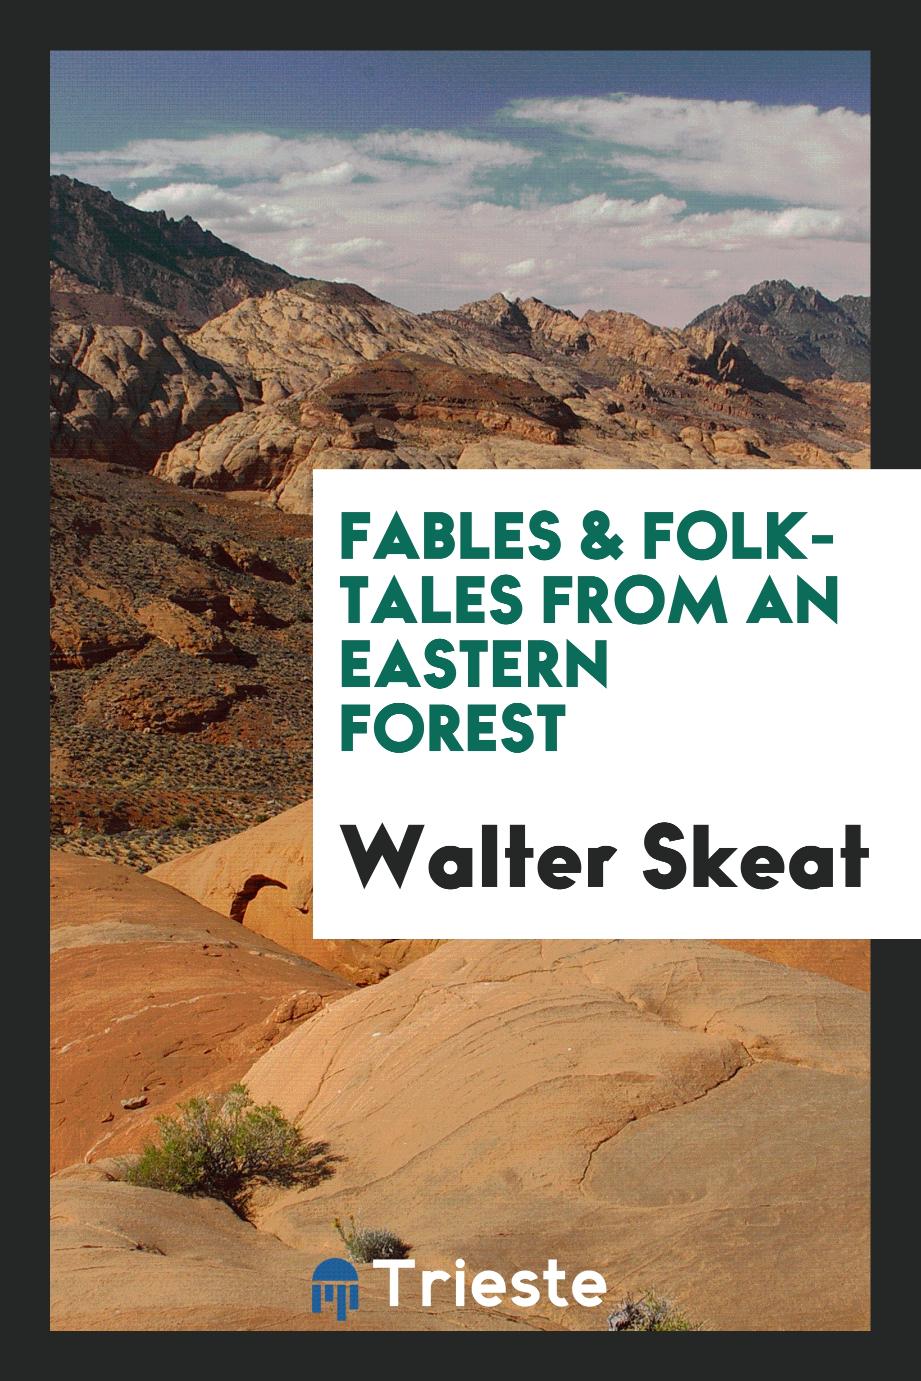 Fables & Folk-Tales from an Eastern Forest